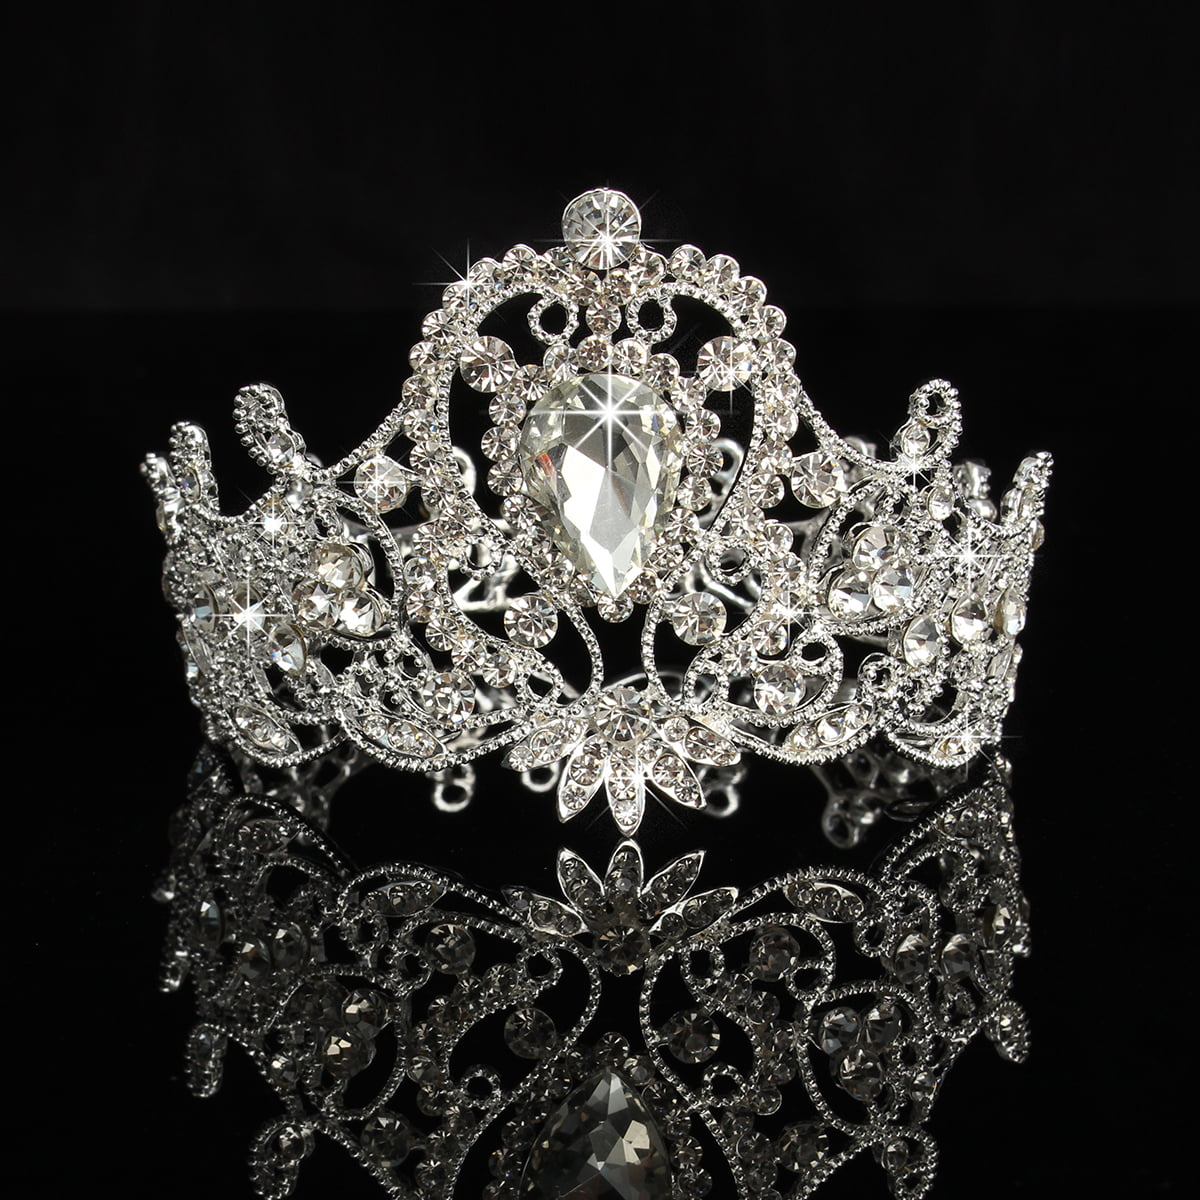 7cm High Leaf Crystal Wedding Bridal Party Pageant Prom Tiara Crown 4 Colours 